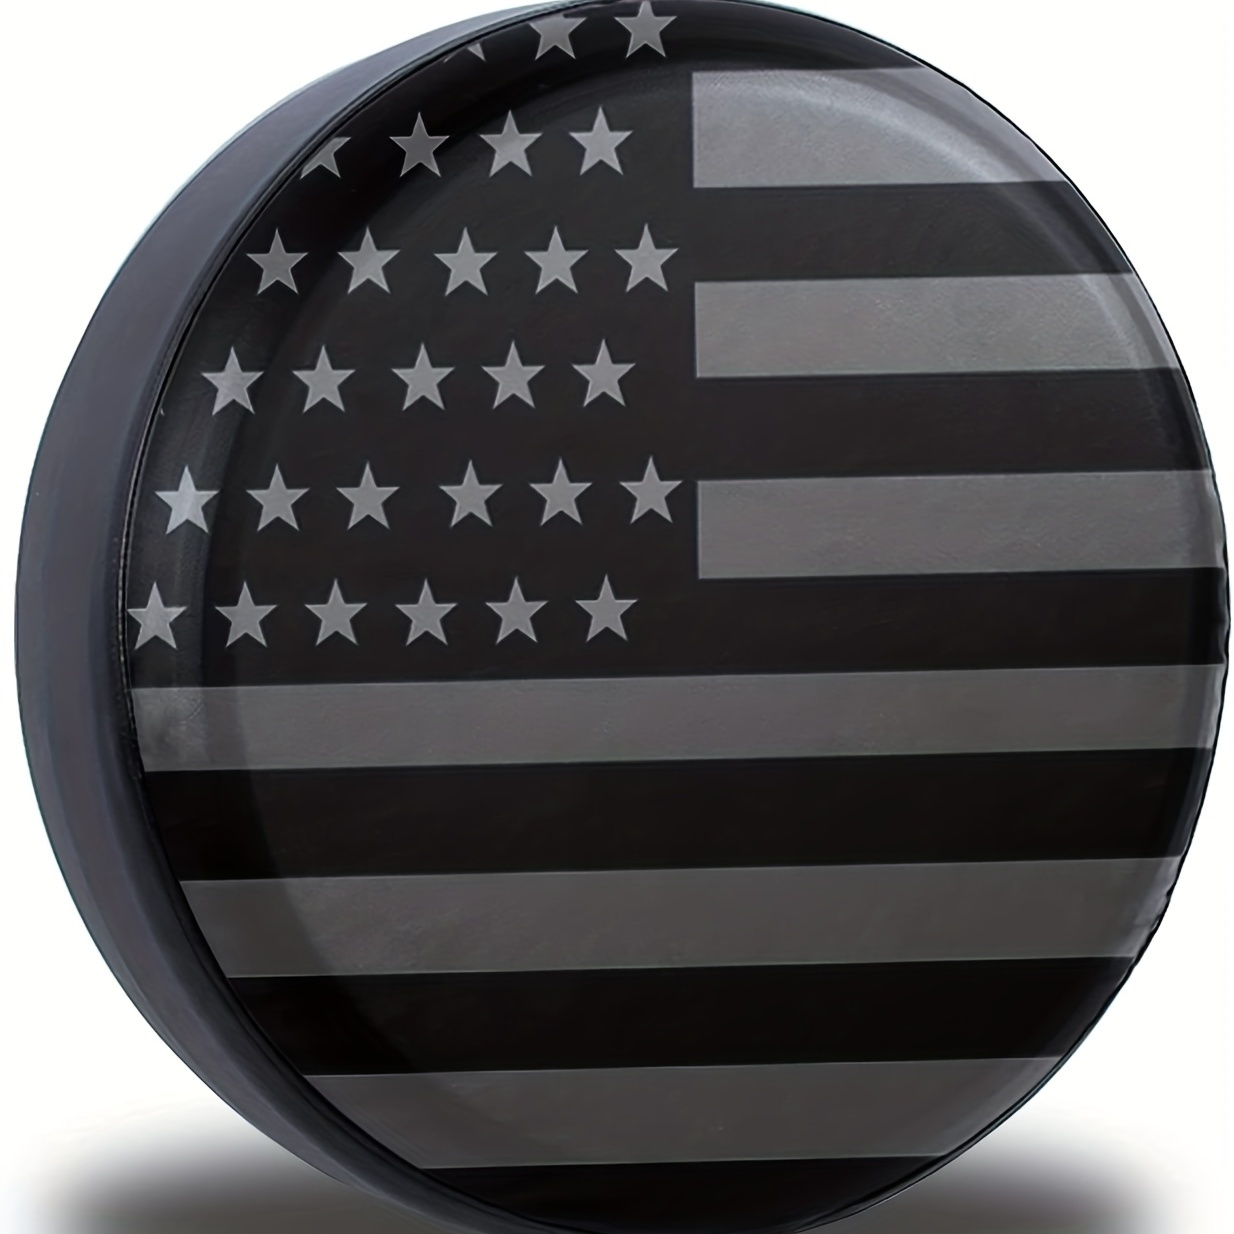 Stand for The Flag, Kneel for The Cross Spare Tire Cover Waterproof Du - 5